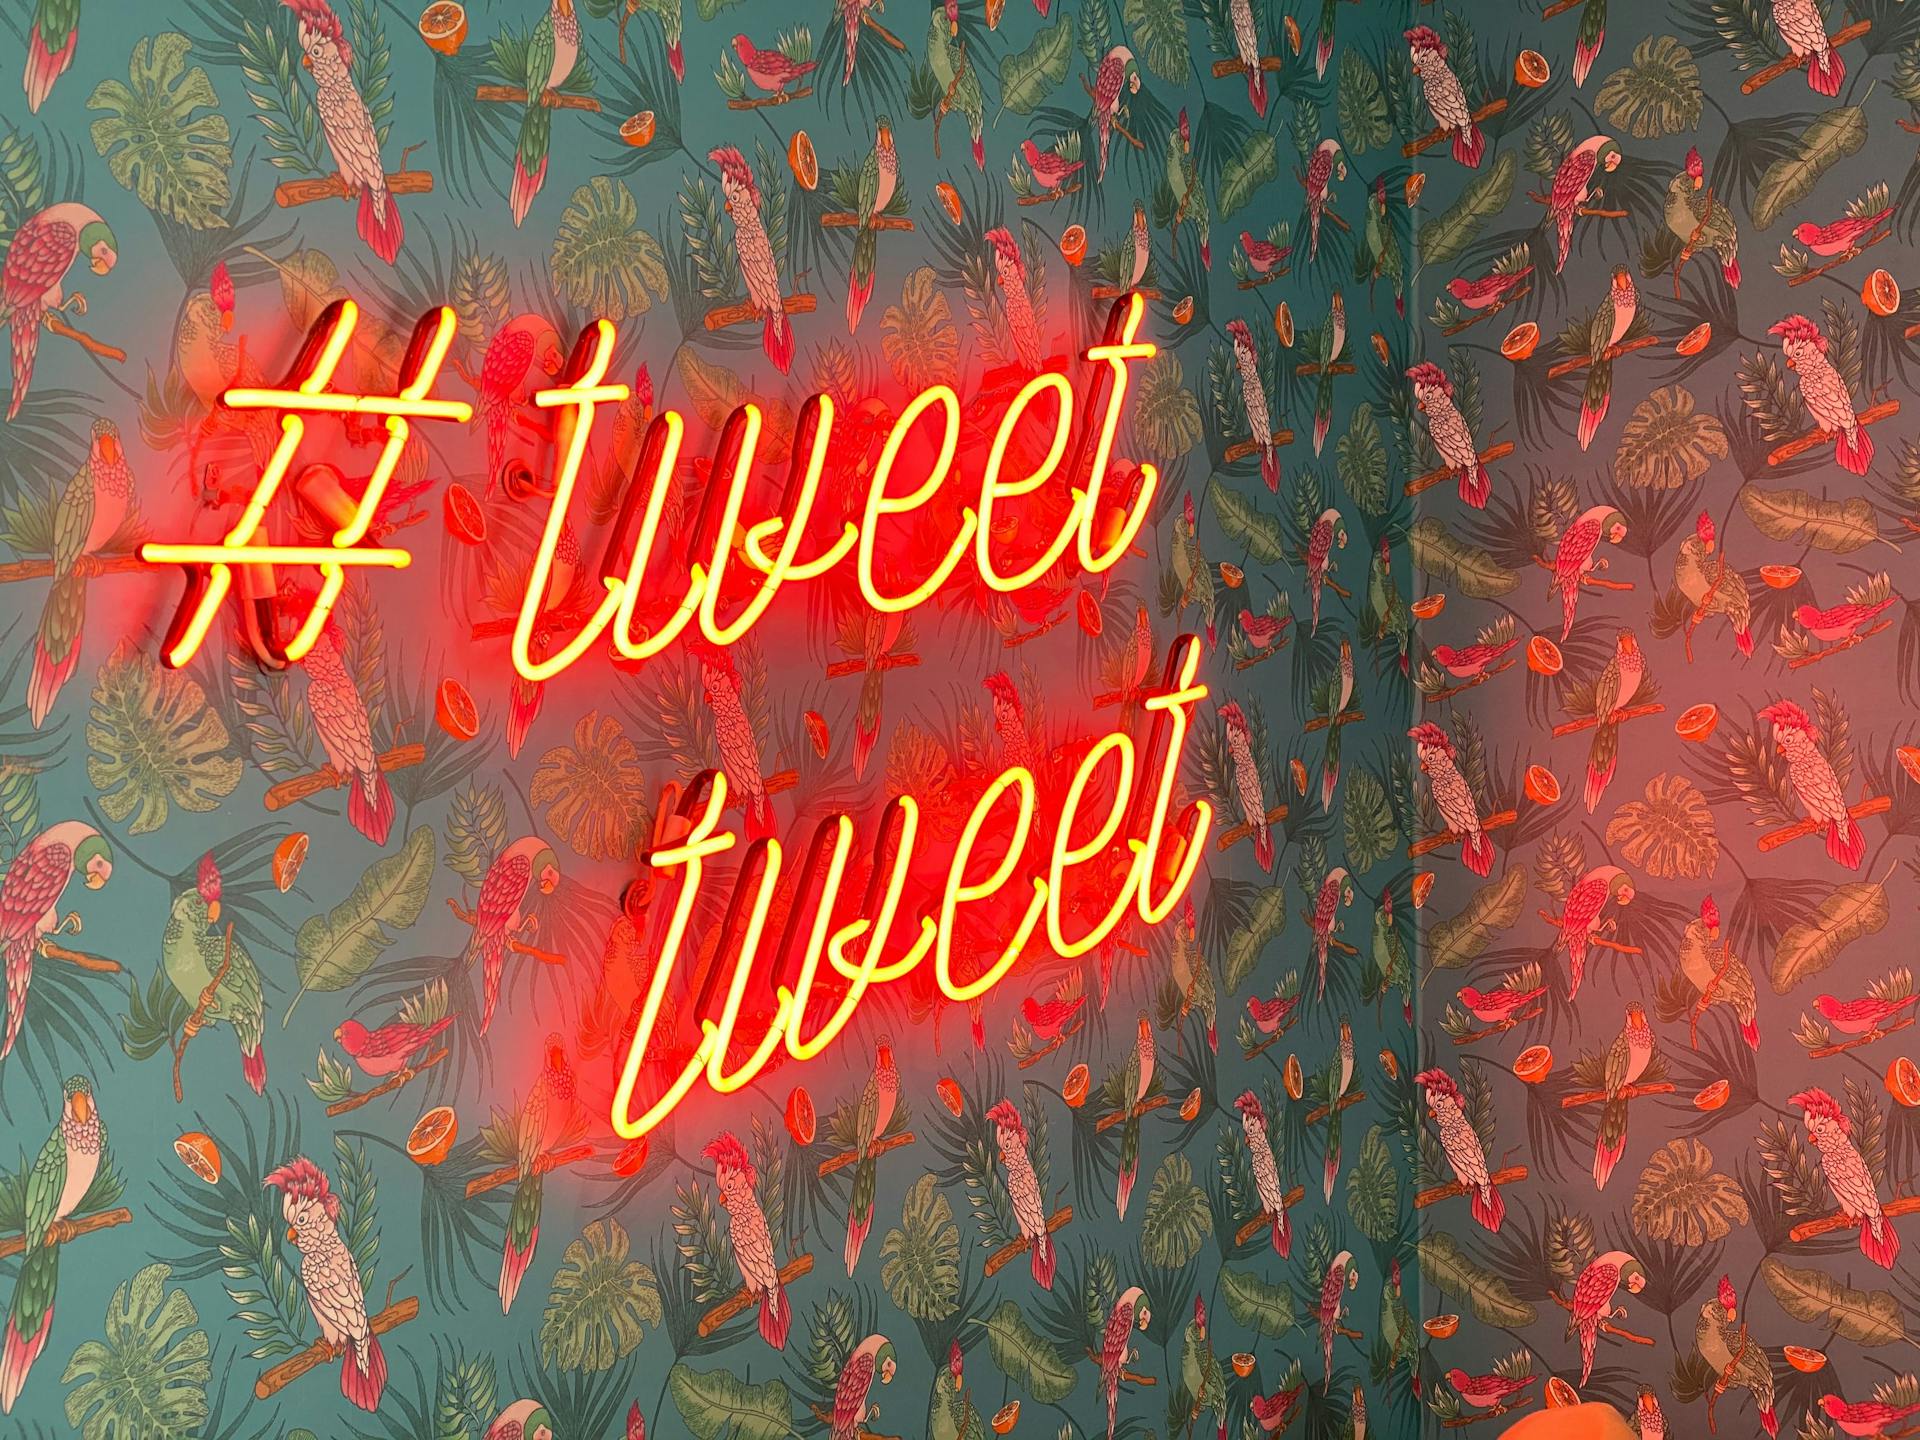 Neon sign with hashtag and two words saying Tweet